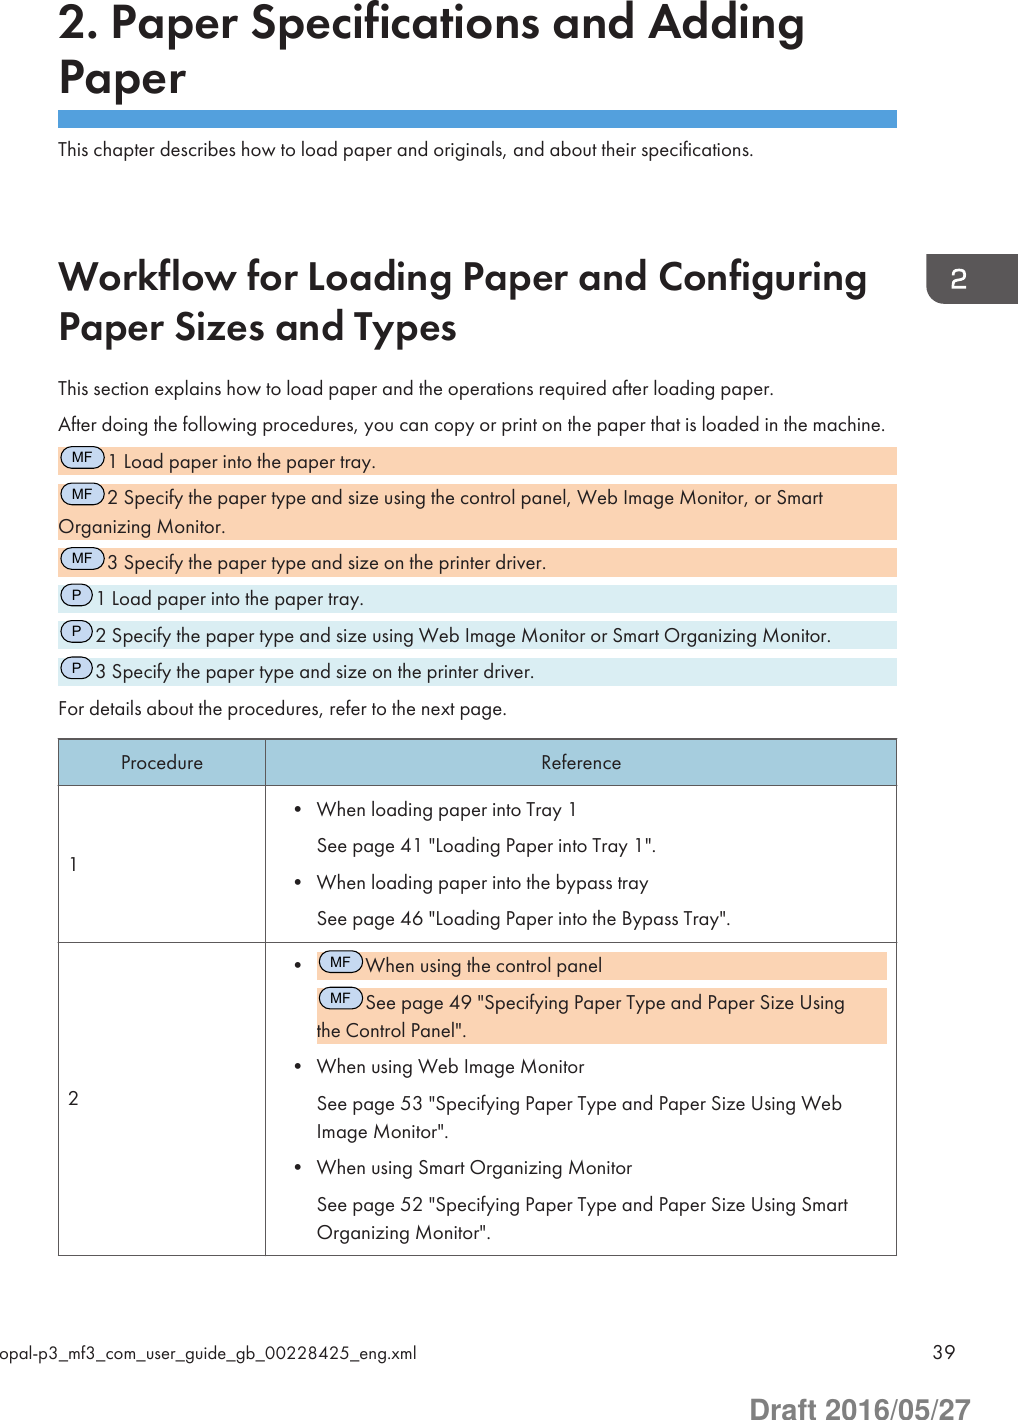 2. Paper Specifications and AddingPaperThis chapter describes how to load paper and originals, and about their specifications.Workflow for Loading Paper and ConfiguringPaper Sizes and TypesThis section explains how to load paper and the operations required after loading paper.After doing the following procedures, you can copy or print on the paper that is loaded in the machine.MF1 Load paper into the paper tray.MF2 Specify the paper type and size using the control panel, Web Image Monitor, or SmartOrganizing Monitor.MF3 Specify the paper type and size on the printer driver.P1 Load paper into the paper tray.P2 Specify the paper type and size using Web Image Monitor or Smart Organizing Monitor.P3 Specify the paper type and size on the printer driver.For details about the procedures, refer to the next page.Procedure Reference1• When loading paper into Tray 1See page 41 &quot;Loading Paper into Tray 1&quot;.• When loading paper into the bypass traySee page 46 &quot;Loading Paper into the Bypass Tray&quot;.2•MFWhen using the control panelMFSee page 49 &quot;Specifying Paper Type and Paper Size Usingthe Control Panel&quot;.• When using Web Image MonitorSee page 53 &quot;Specifying Paper Type and Paper Size Using WebImage Monitor&quot;.• When using Smart Organizing MonitorSee page 52 &quot;Specifying Paper Type and Paper Size Using SmartOrganizing Monitor&quot;.opal-p3_mf3_com_user_guide_gb_00228425_eng.xml 39Draft 2016/05/27